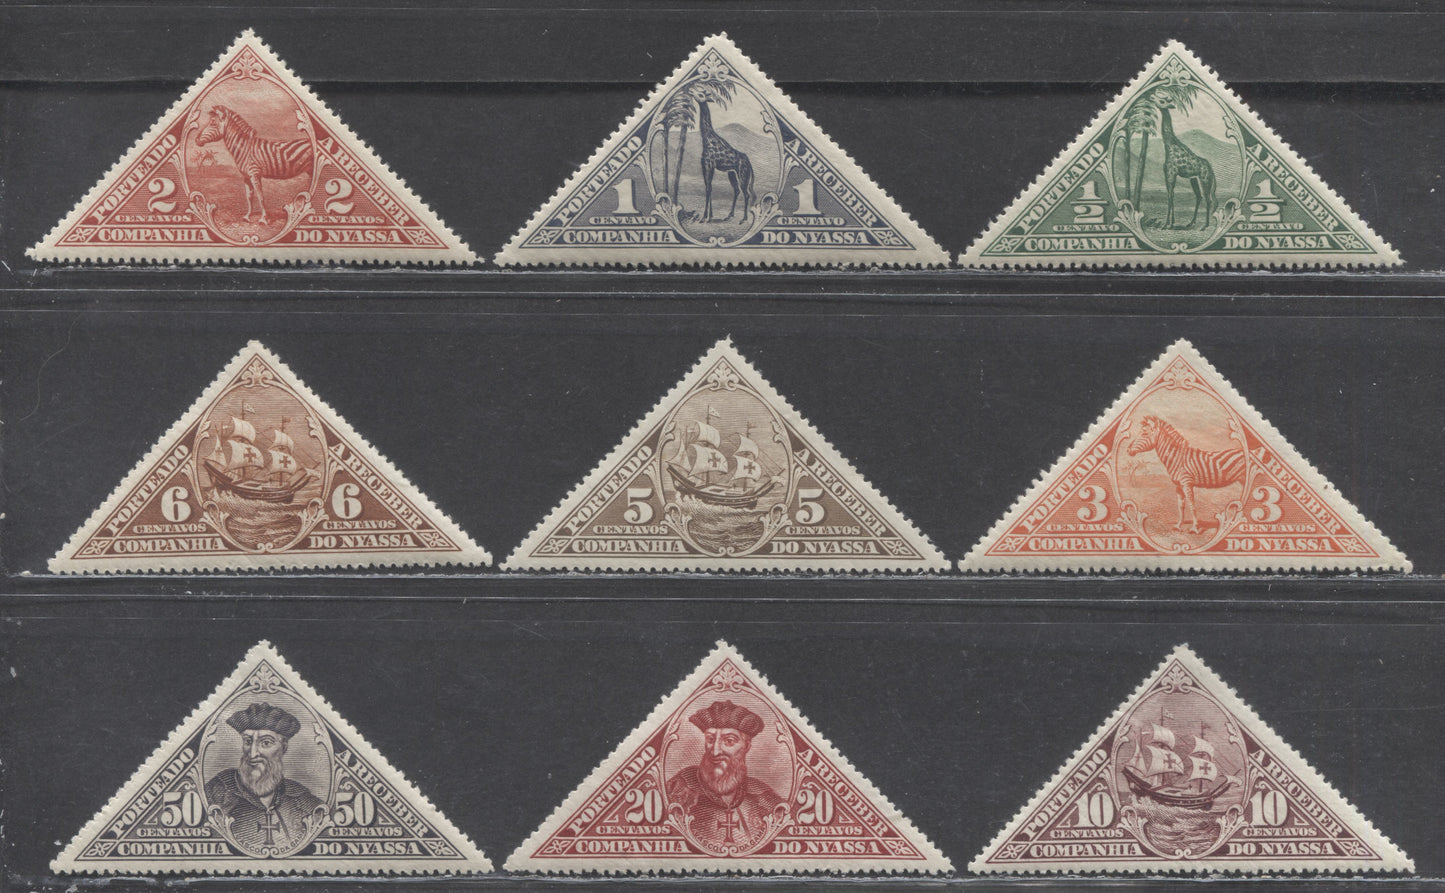 Lot 562 Nyassa SC#J1-J9 1924 Postage Due Issue, 9 VFOG Singles, Click on Listing to See ALL Pictures, 2022 Scott Classic Cat. $27 USD